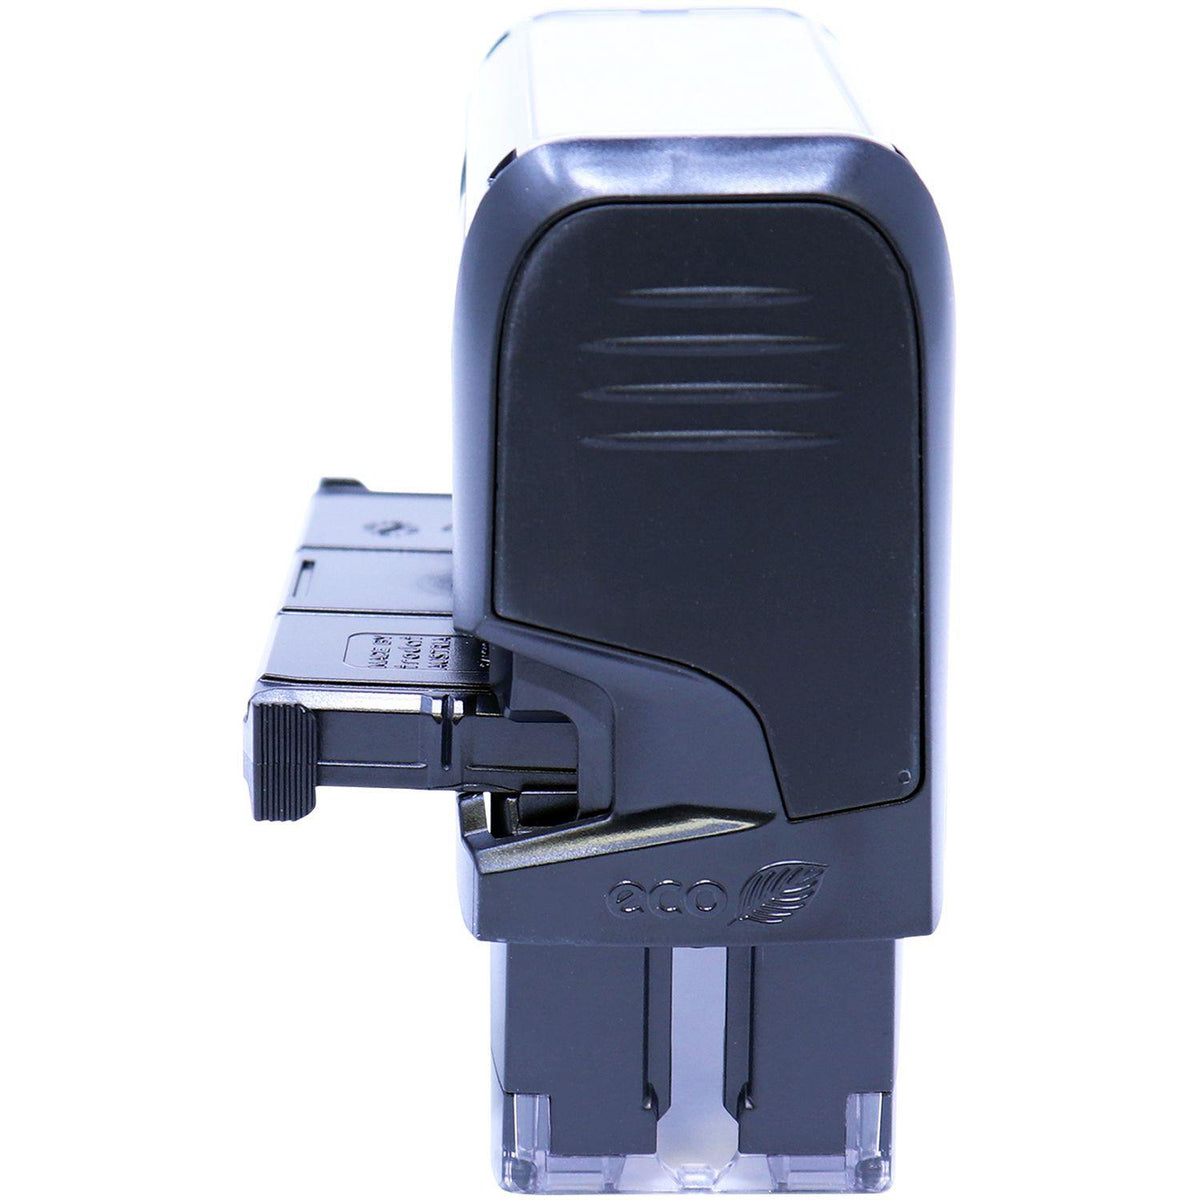 Self-Inking Cancelado Stamp - Engineer Seal Stamps - Brand_Trodat, Impression Size_Small, Stamp Type_Self-Inking Stamp, Type of Use_General, Type of Use_Office